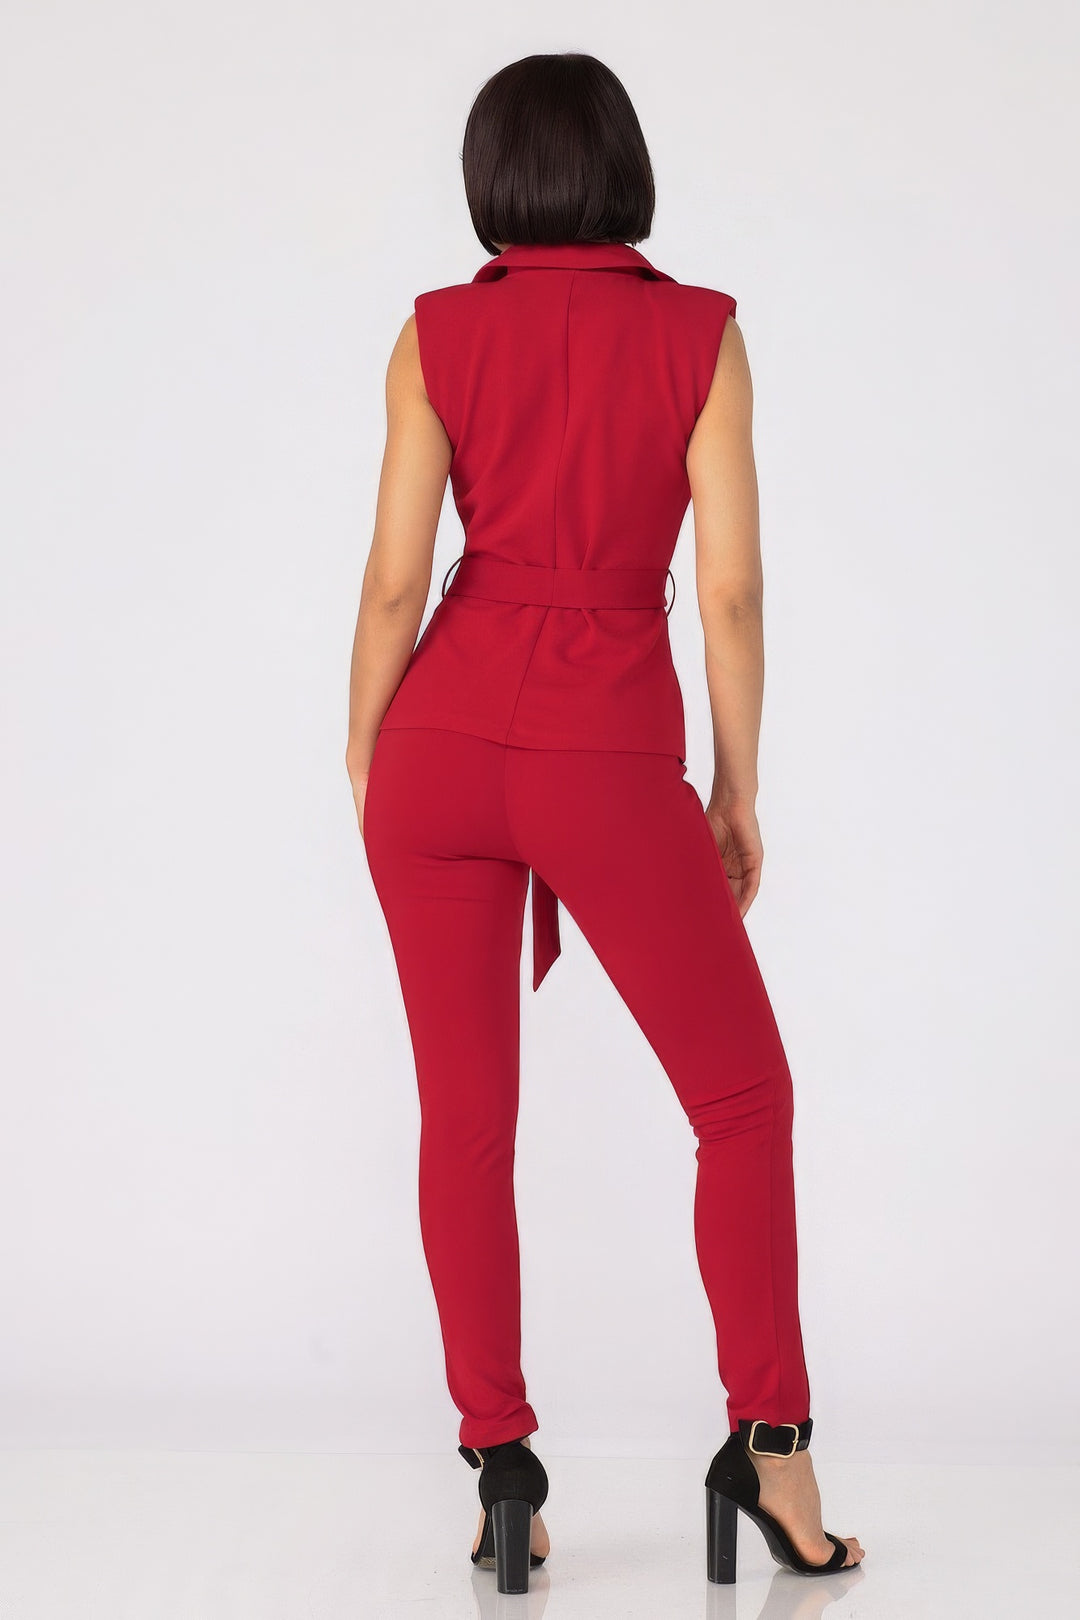 Fashion Top and Pants Set in Red - Button Accent Jacket and Skinny Pants